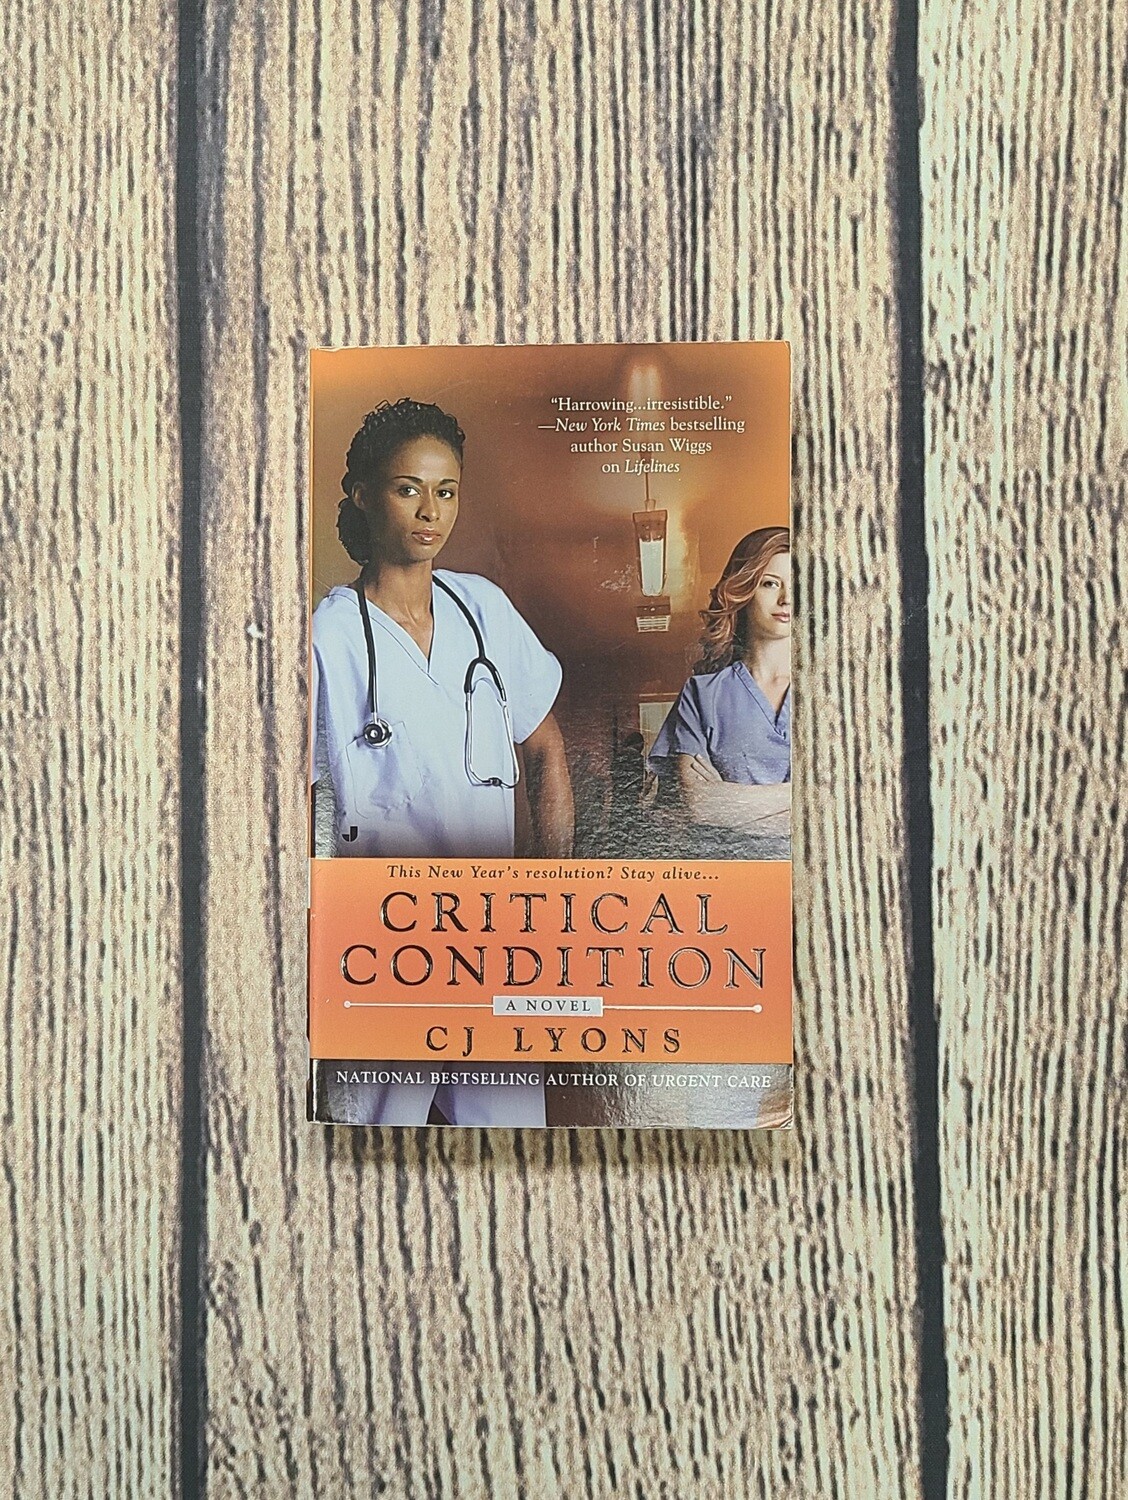 Critical Condition by C. J. Lyons